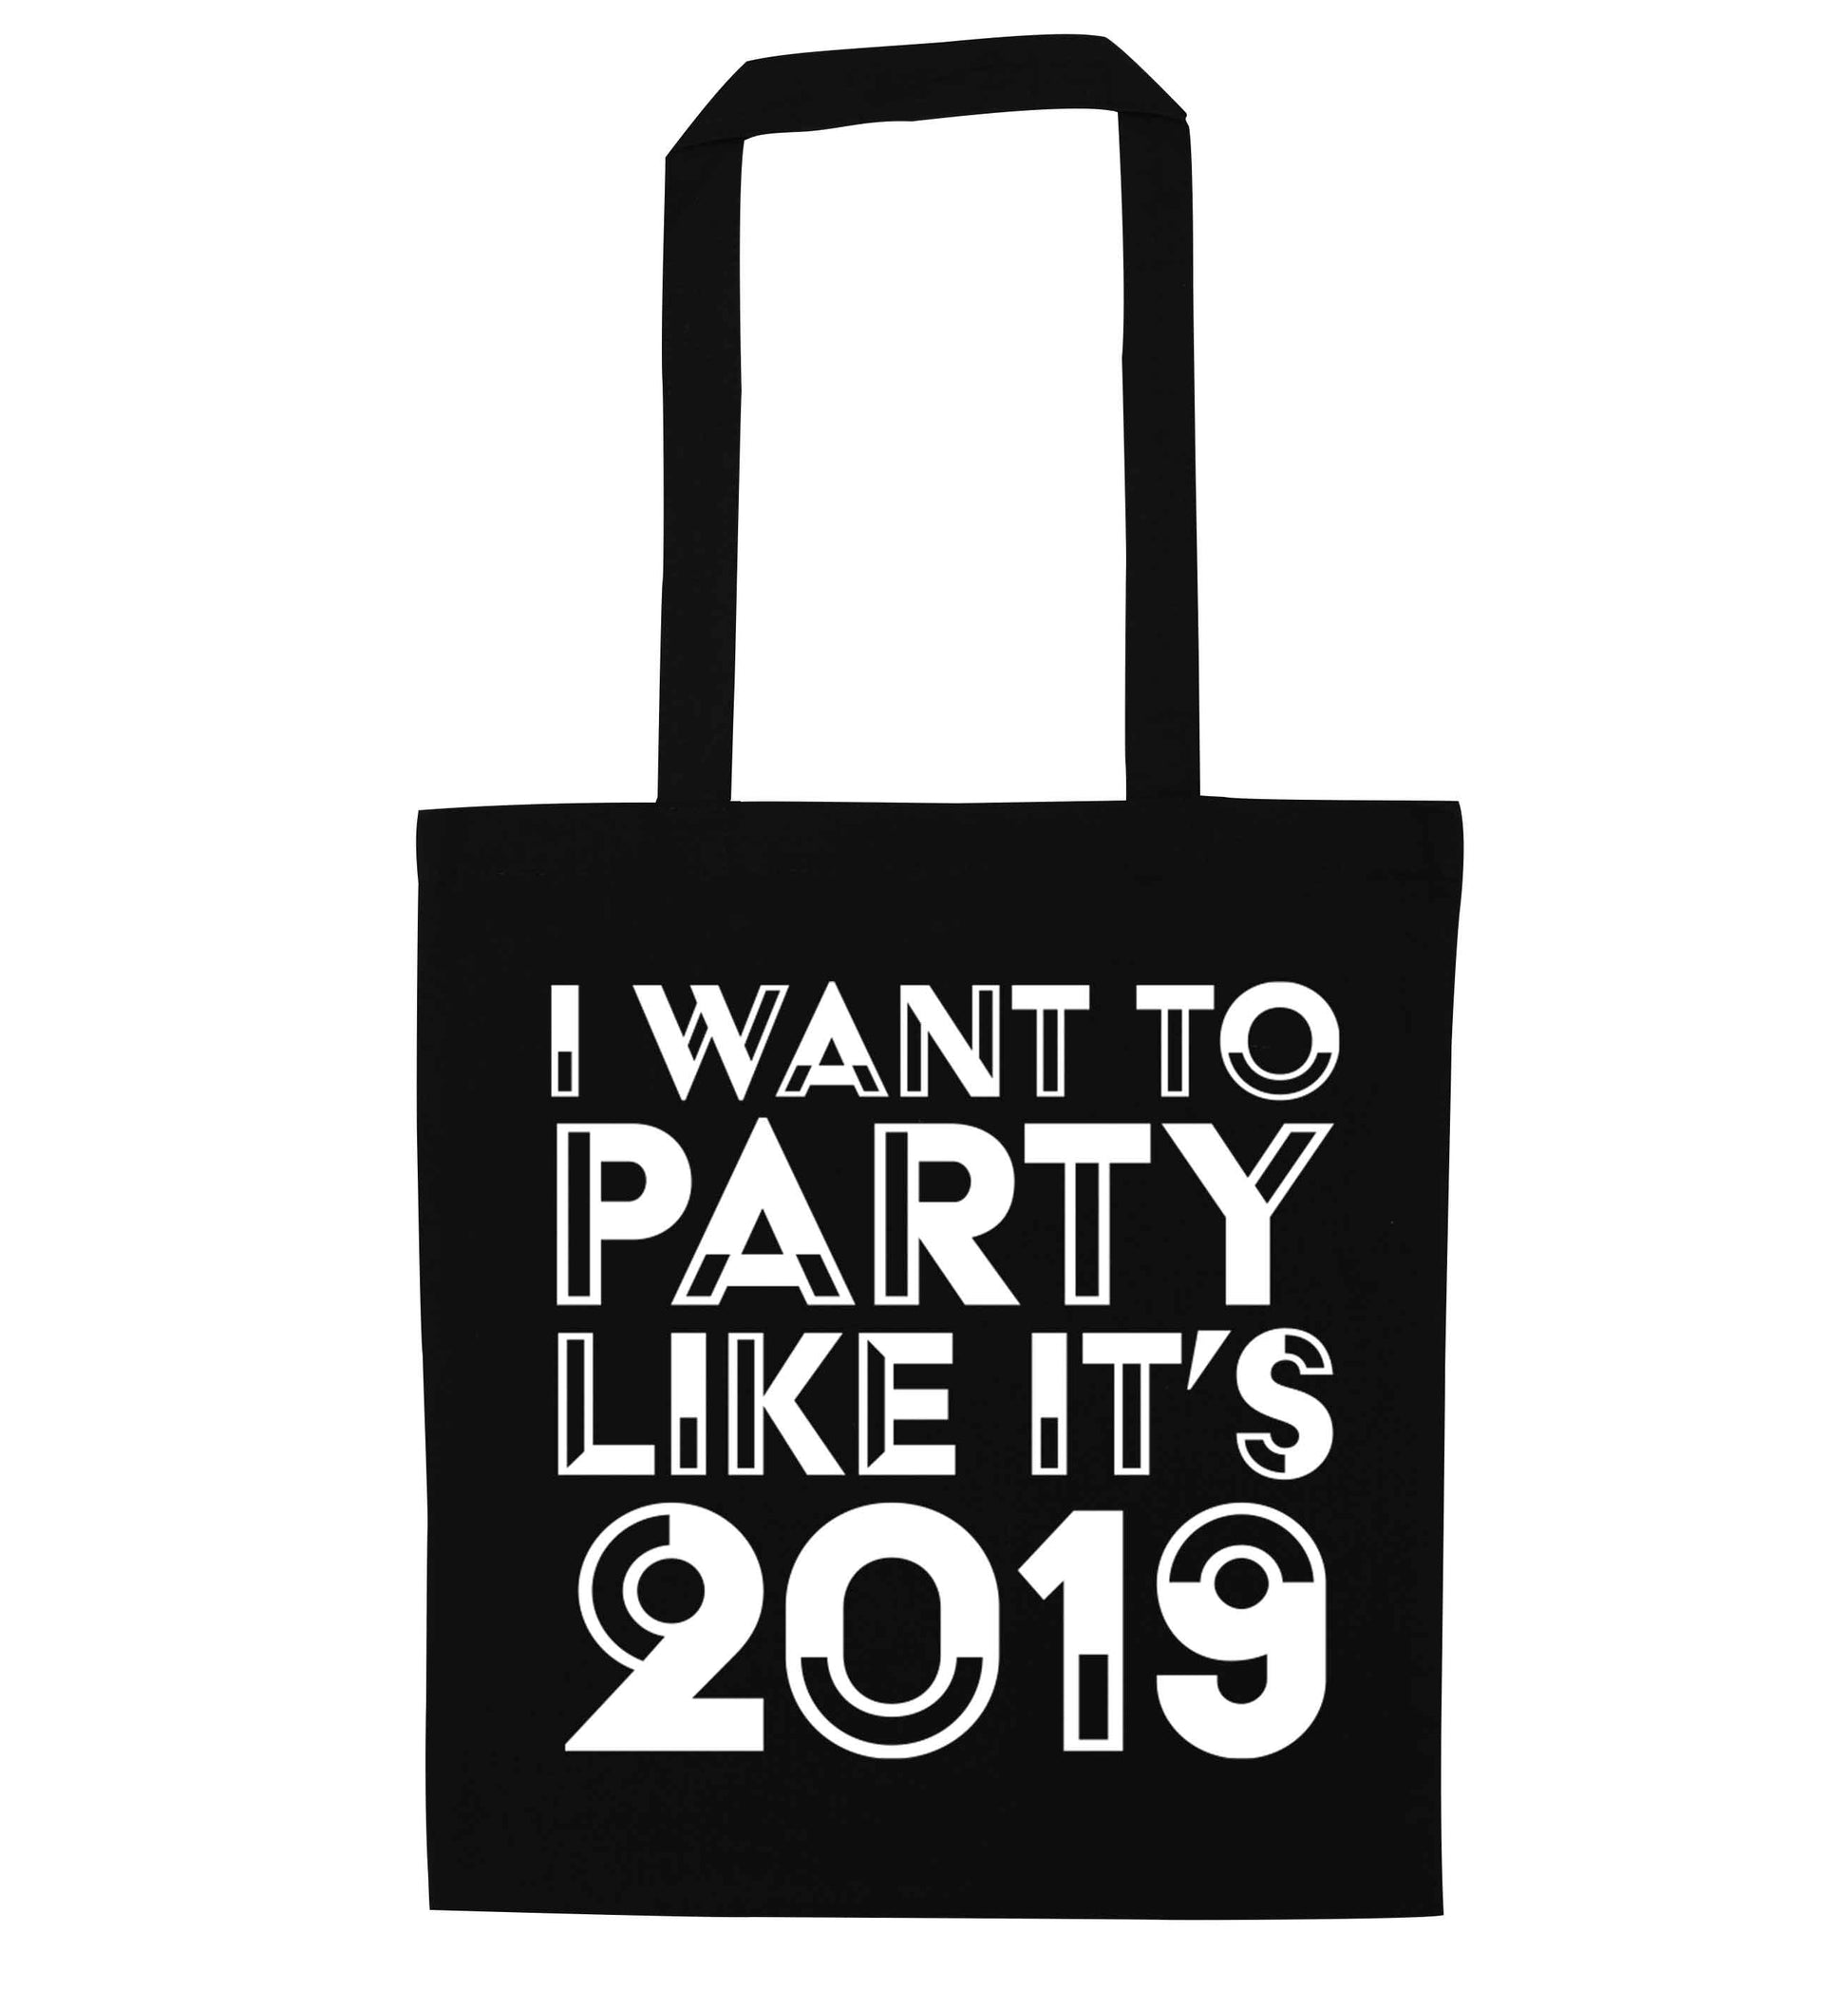 I want to party like it's 2019 black tote bag